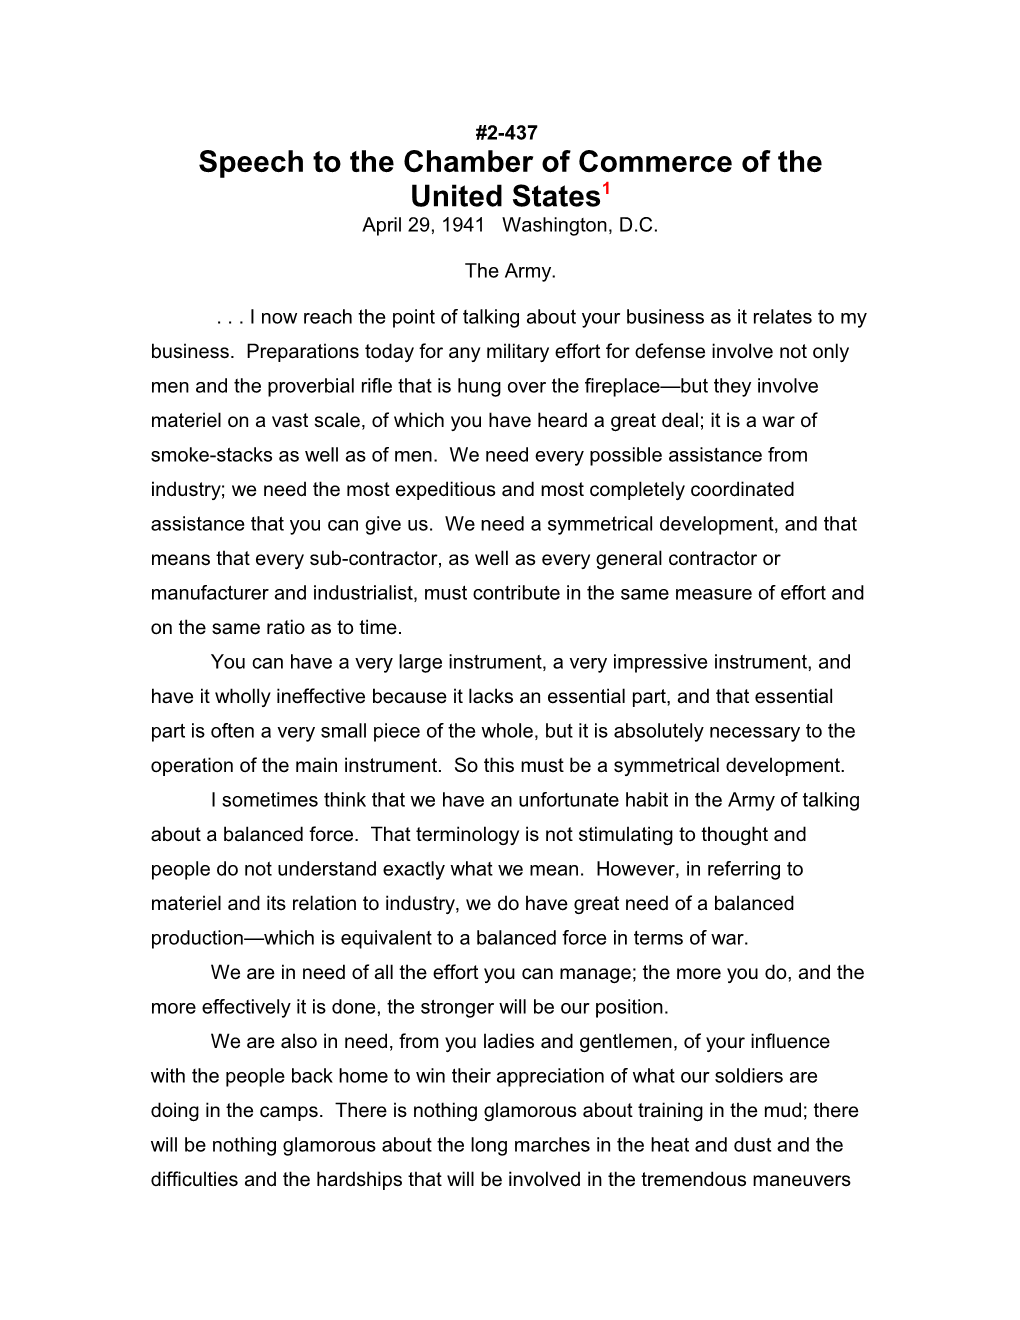 Speech to the Chamber of Commerce of the United States1